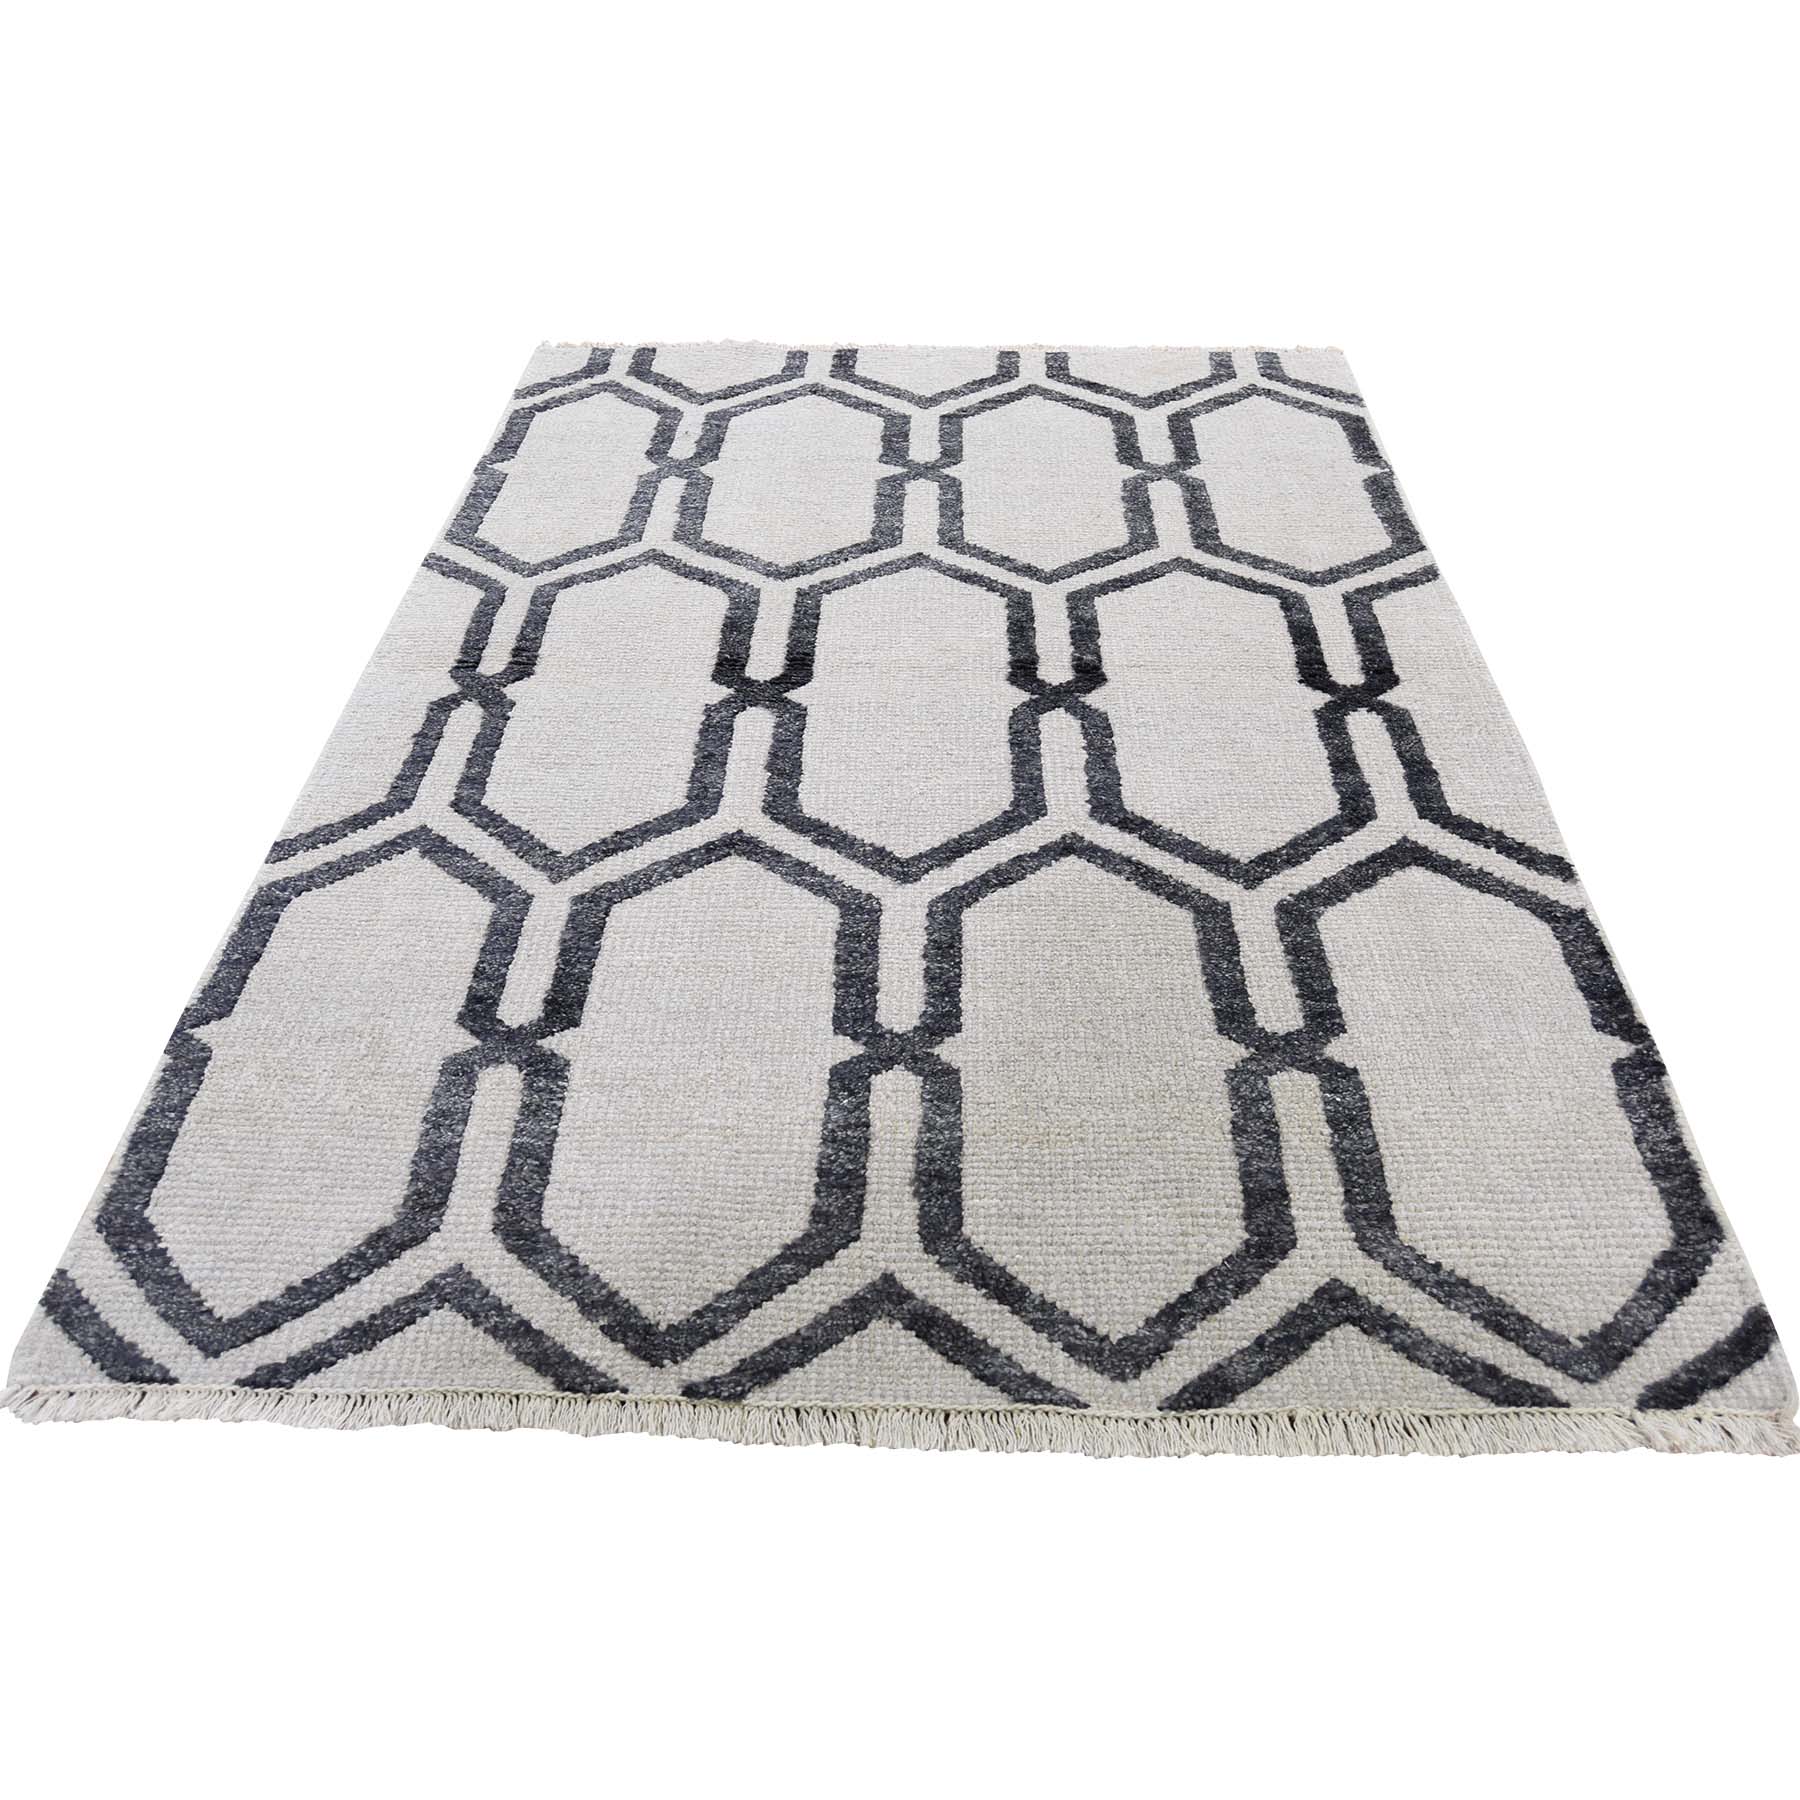 4-x6- Ivory Geometric Design Wool and Silk Hand-Knotted Oriental Rug 